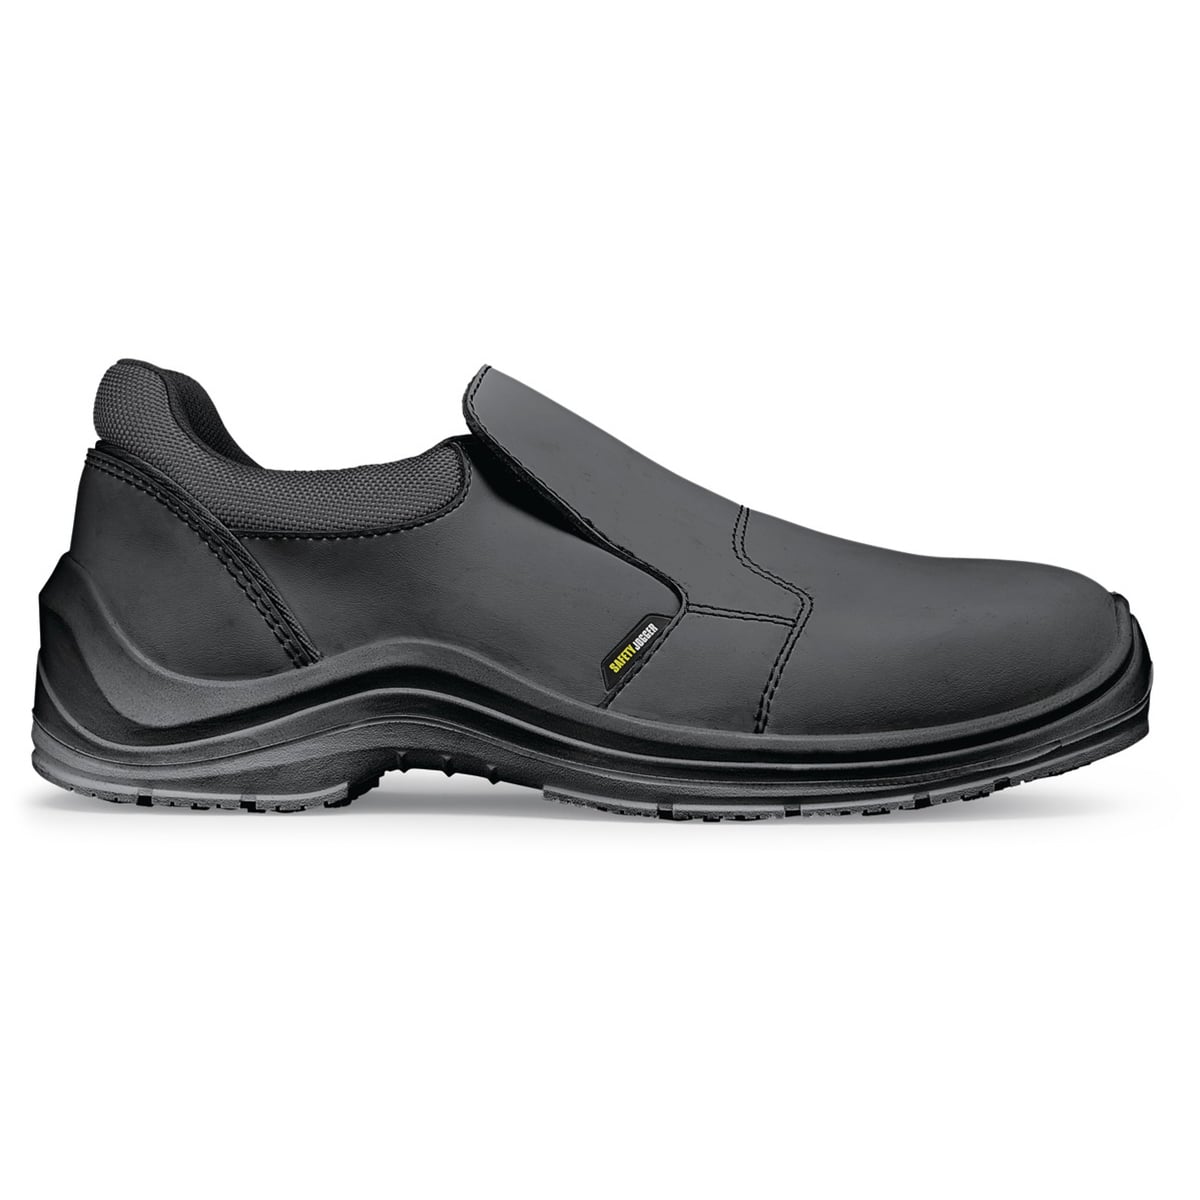 The Dolce81 from Shoes For Crews is a slip-resistant shoe with a waterproof, puncture-resistant upper and a steel toe cap, seen from the right.